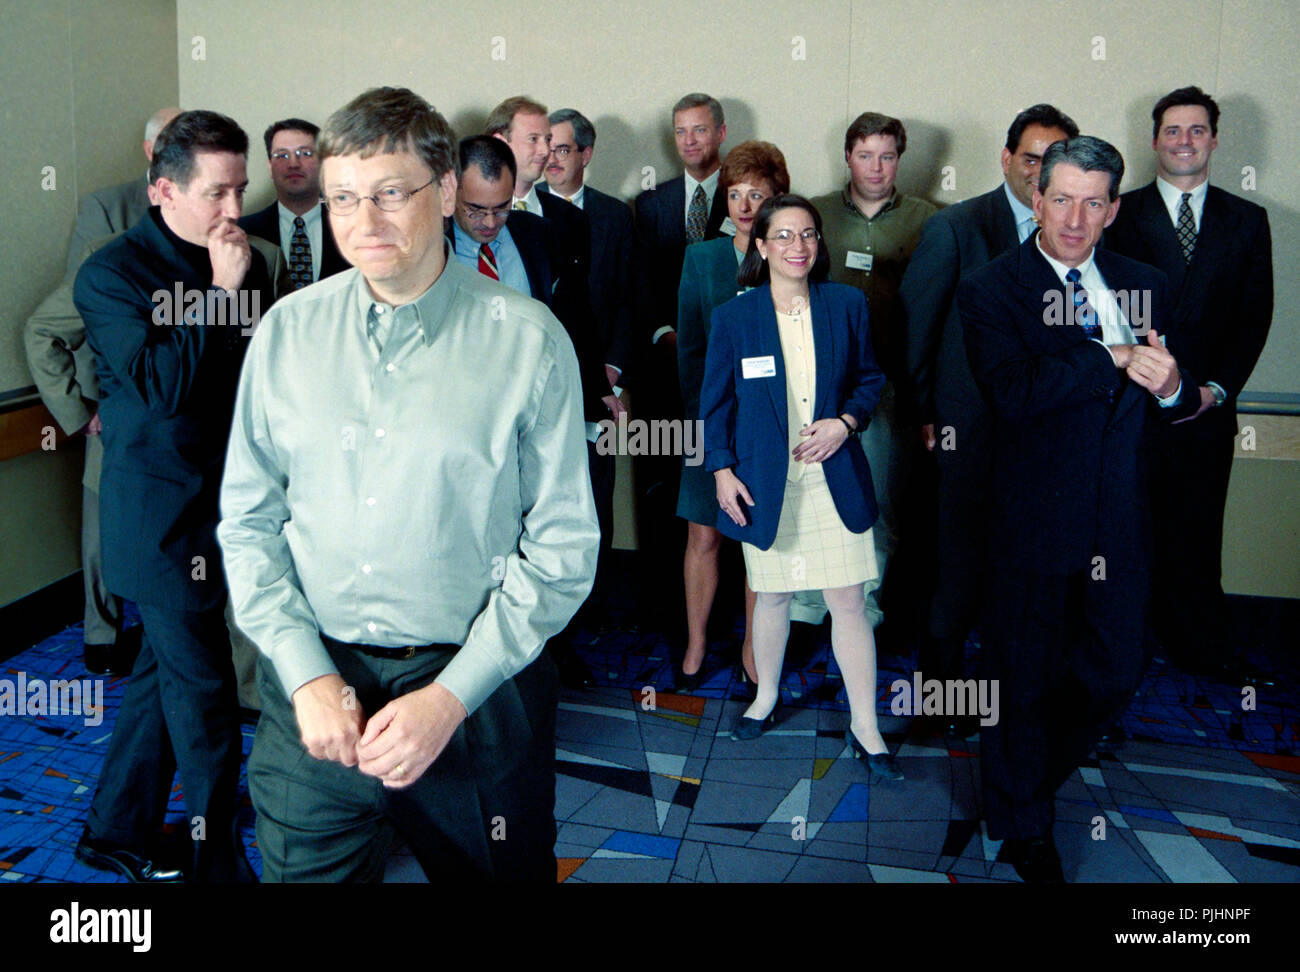 CEO and Microsoft President Bill Gates walks away from a group of sales reps after team picture, ca. 1990. Stock Photo